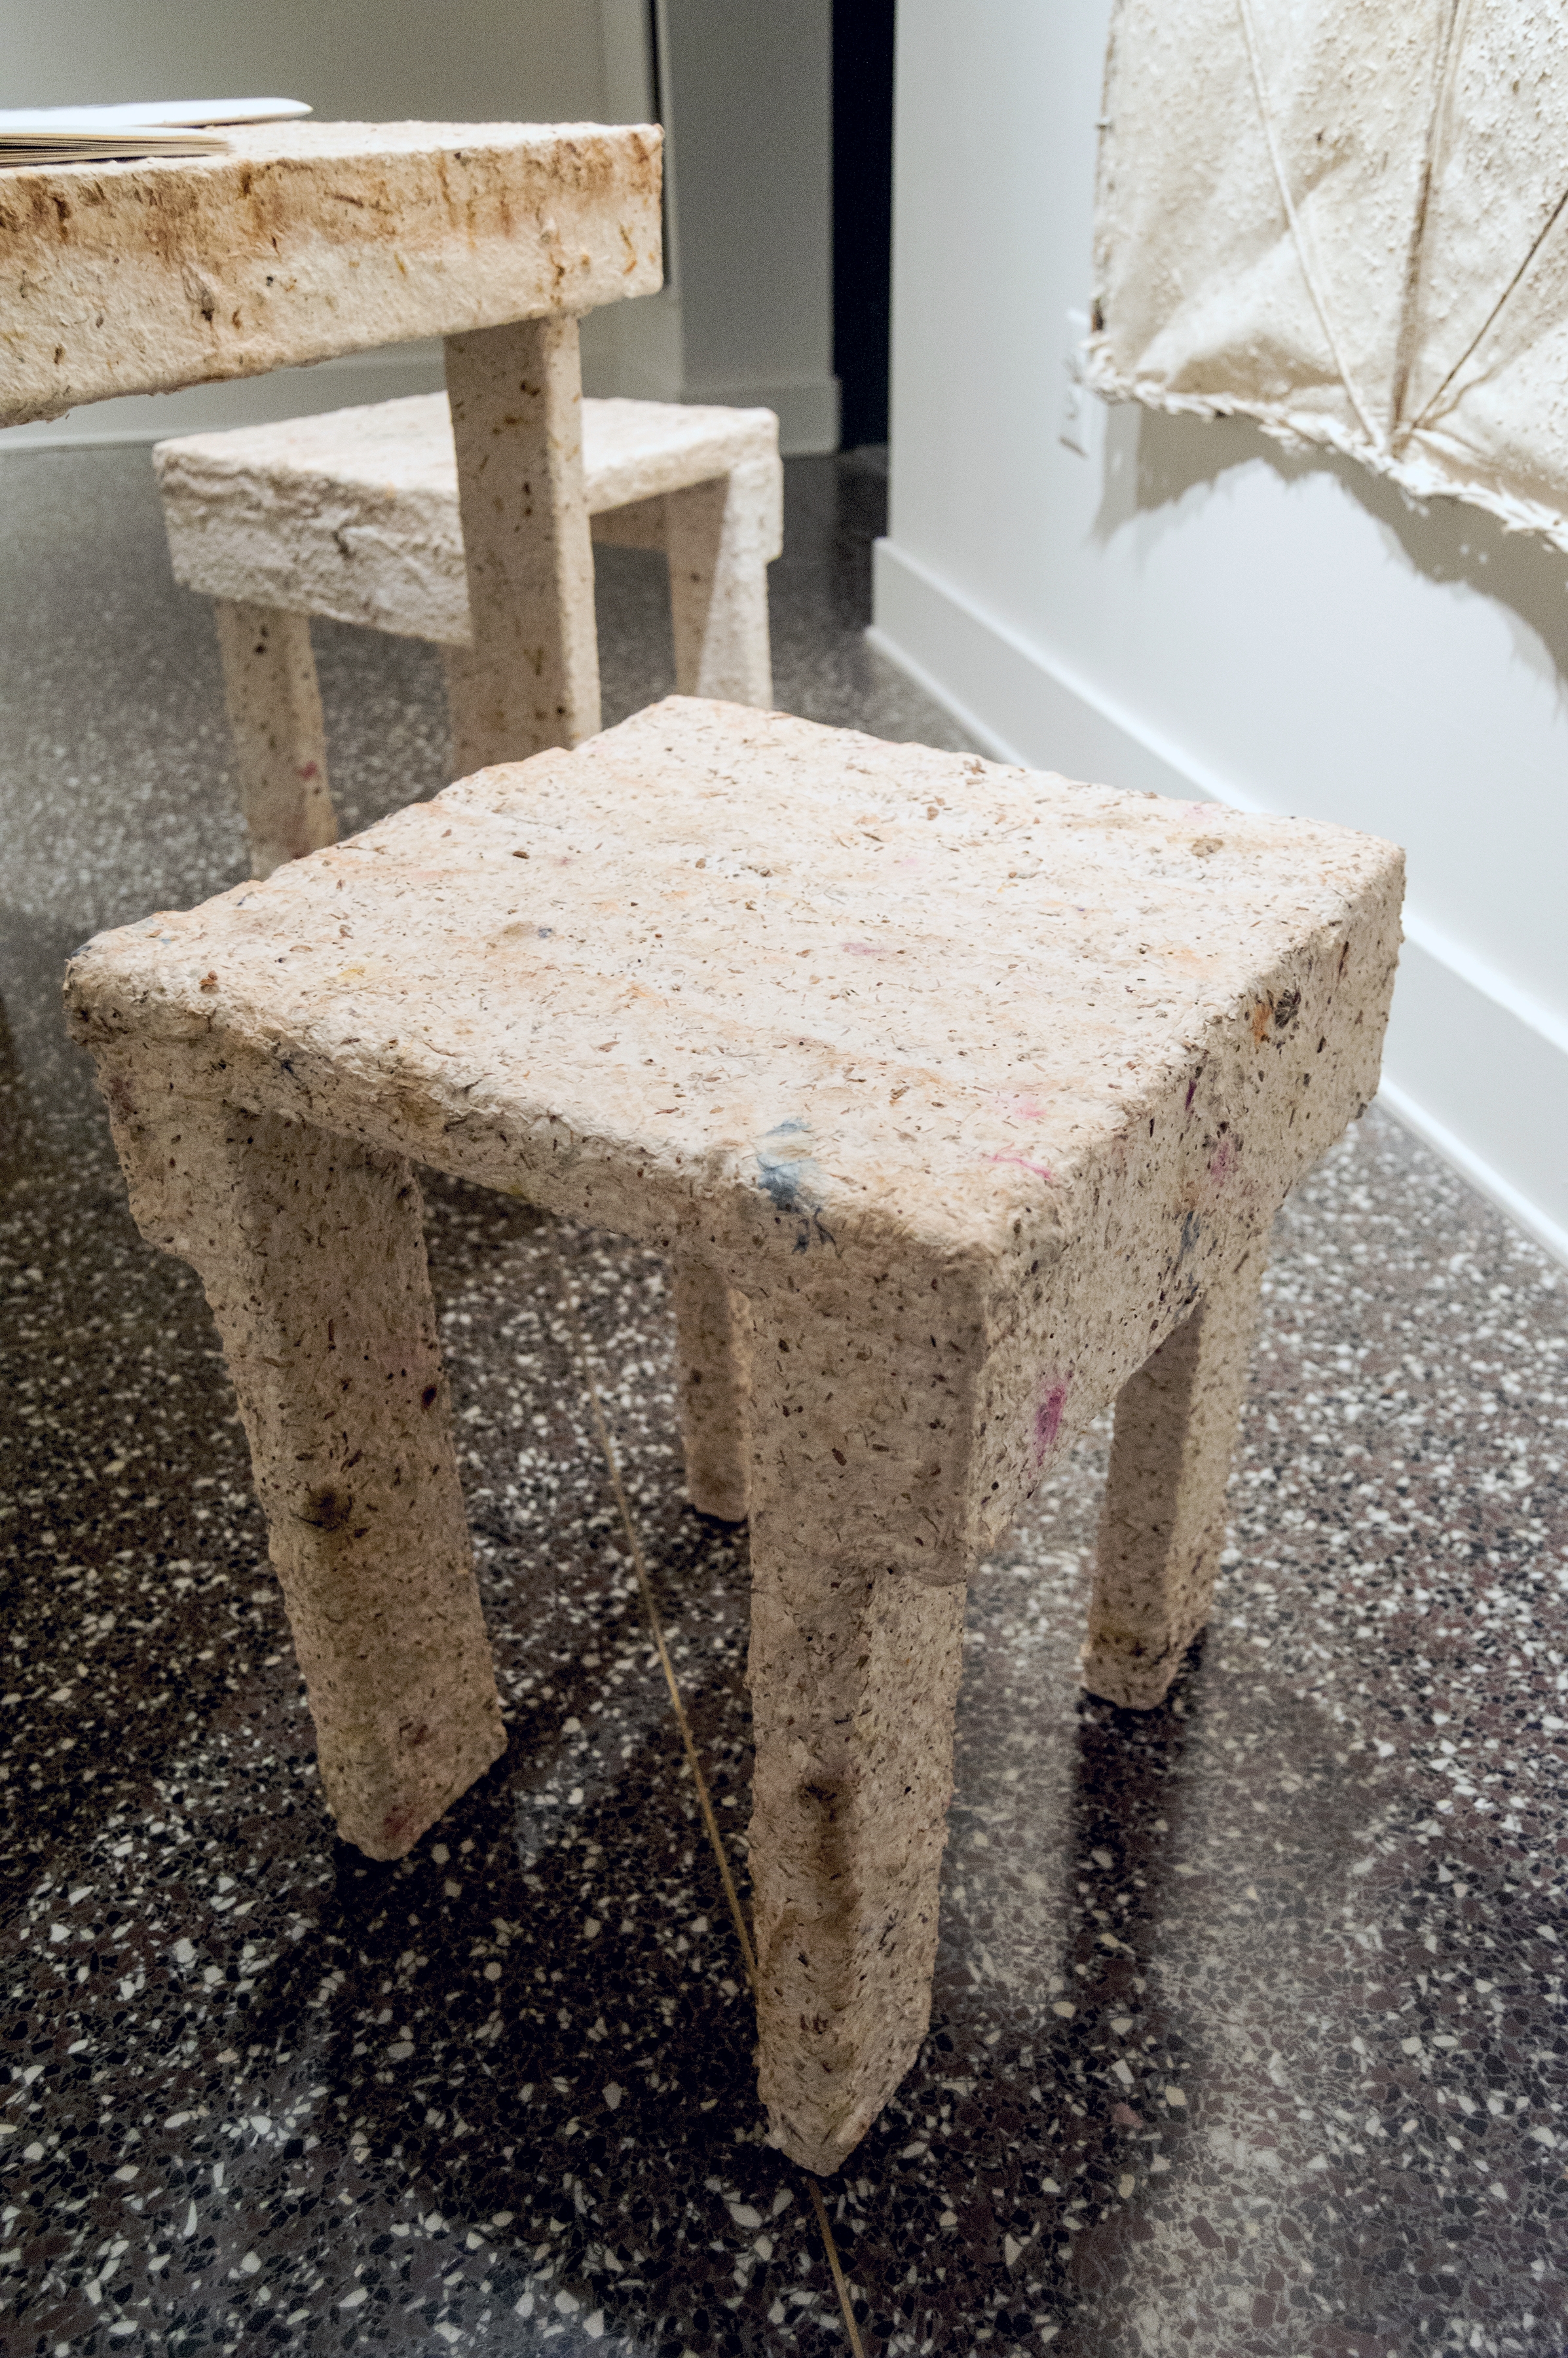 Pulp Cast Table and Stools, and Fiber Panel VI, 2015